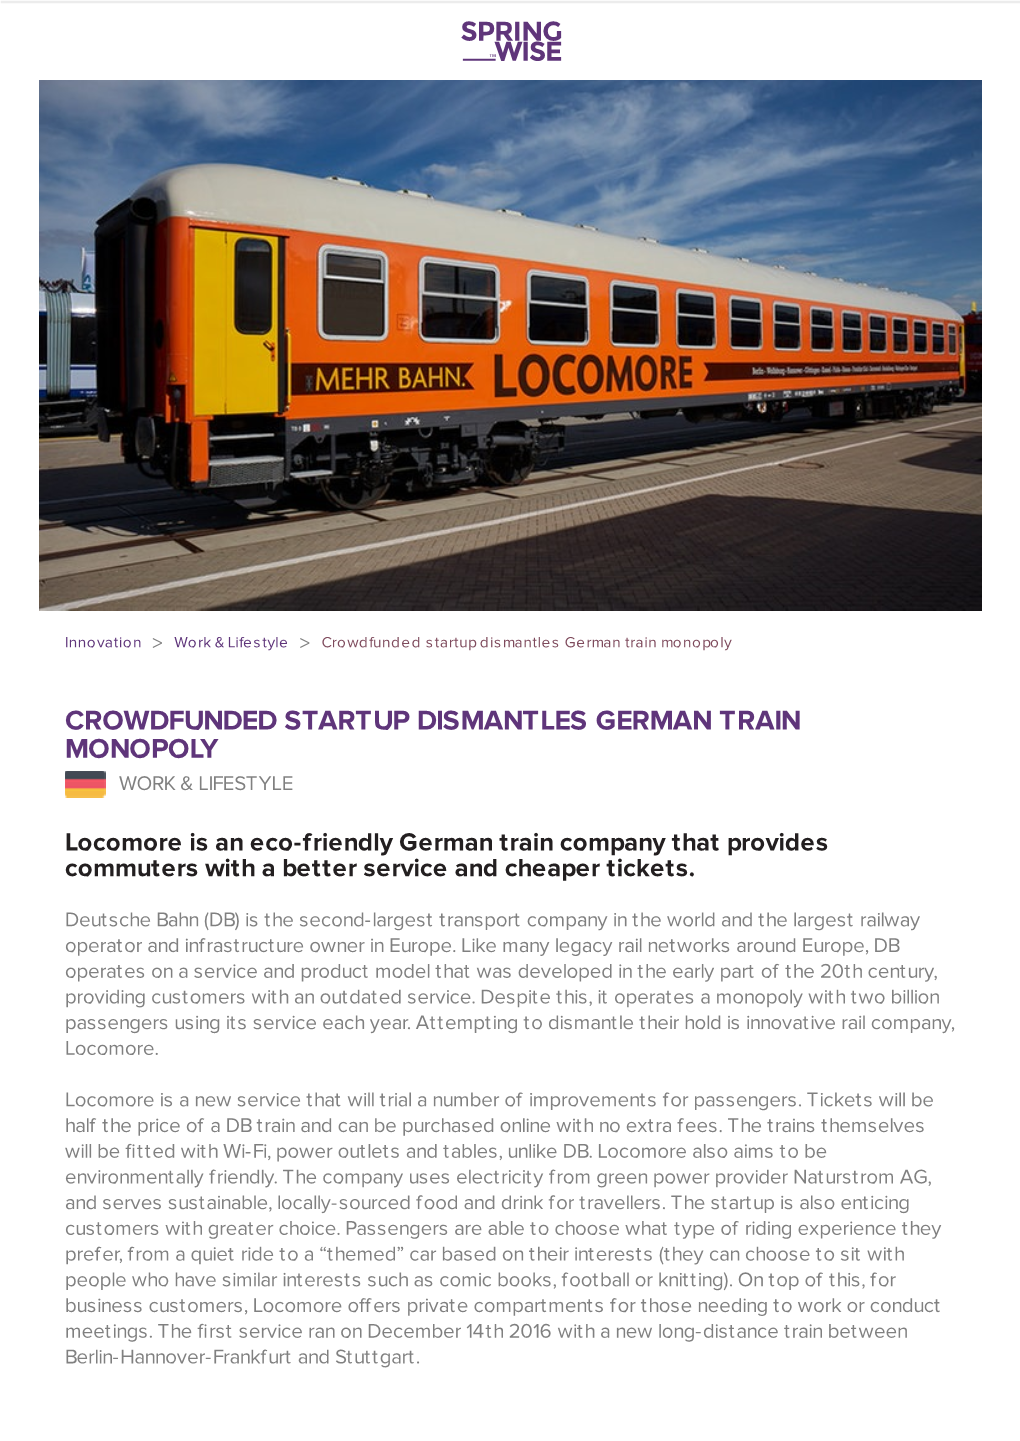 Crowdfunded Startup Dismantles German Train Monopoly